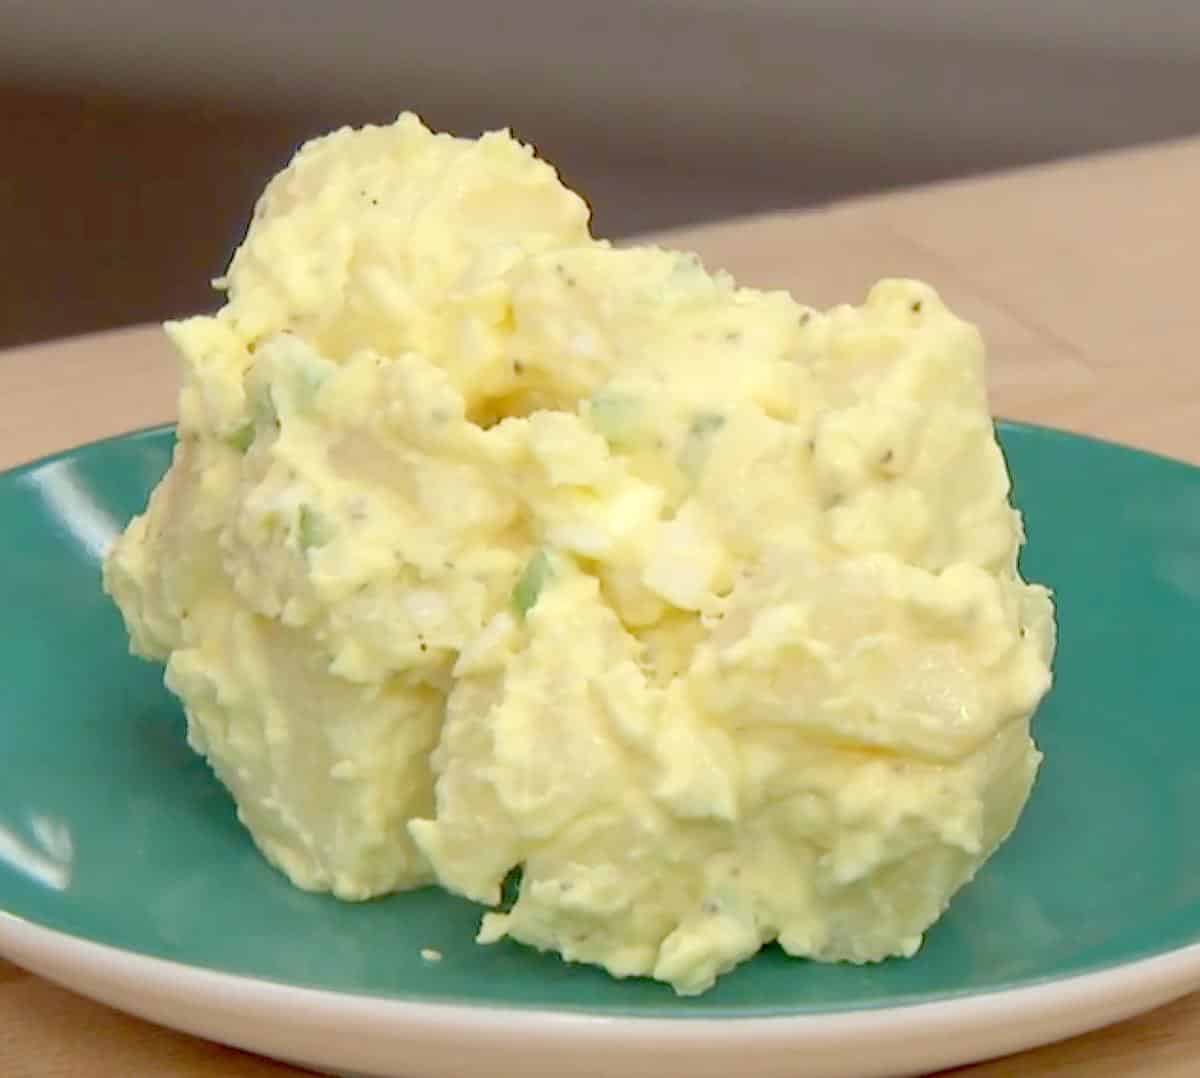  This hearty Amish Potato Salad will quickly become a staple at your summer parties!